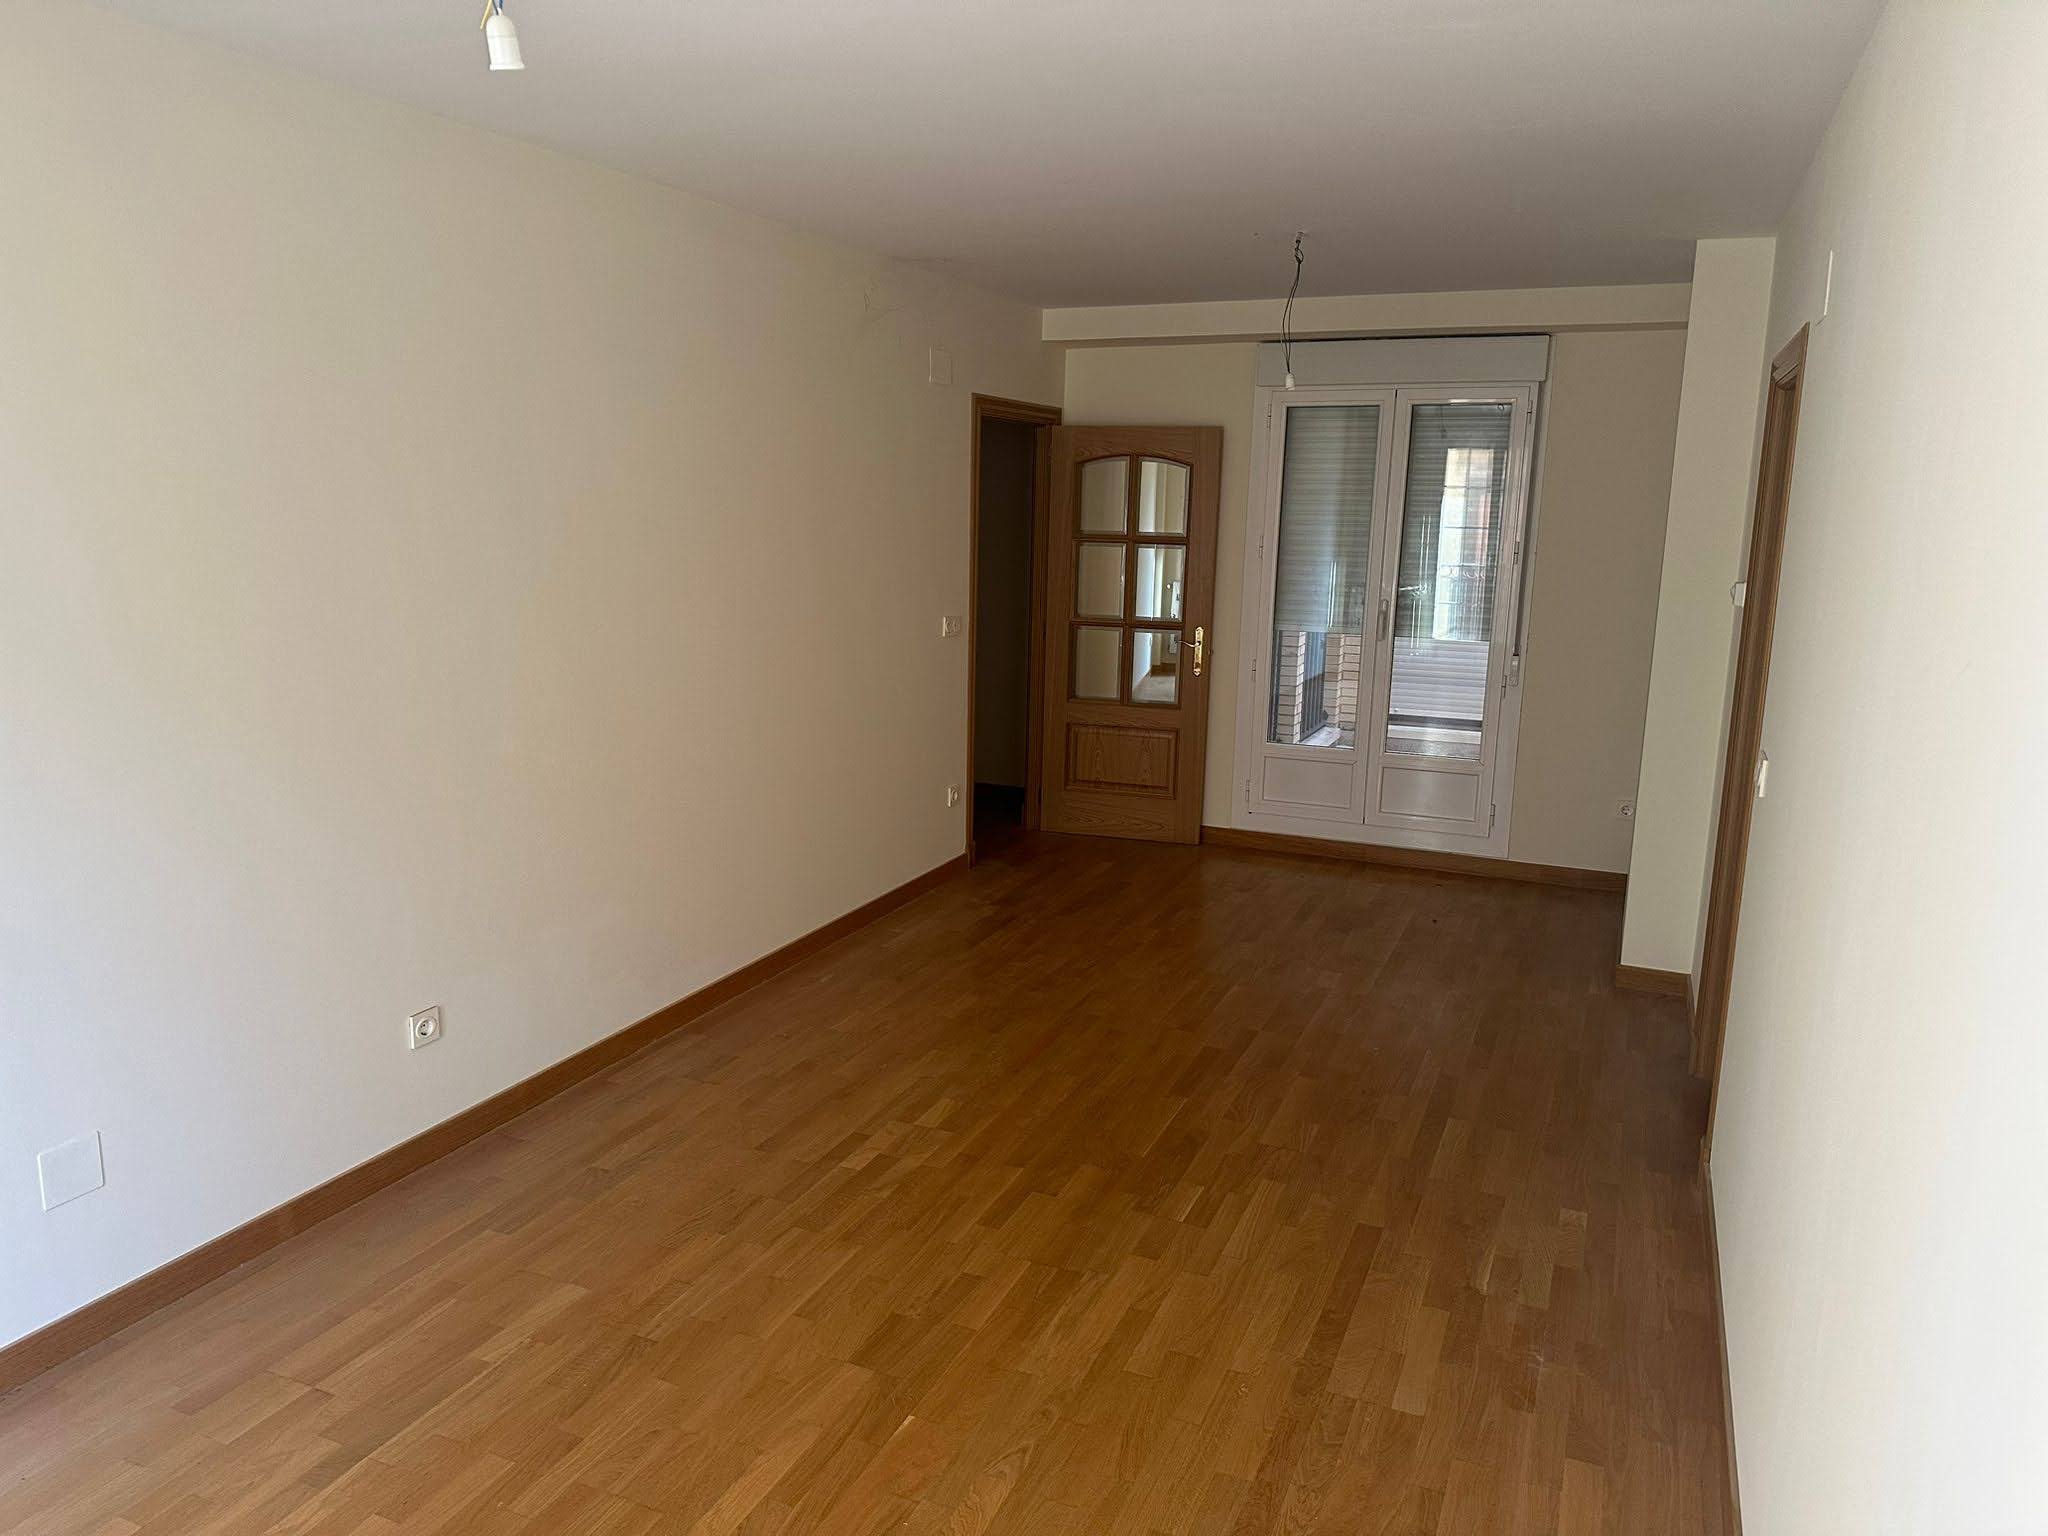 Brand new apartment with garage and elevator in the center. Come and see it!! Opportunity!